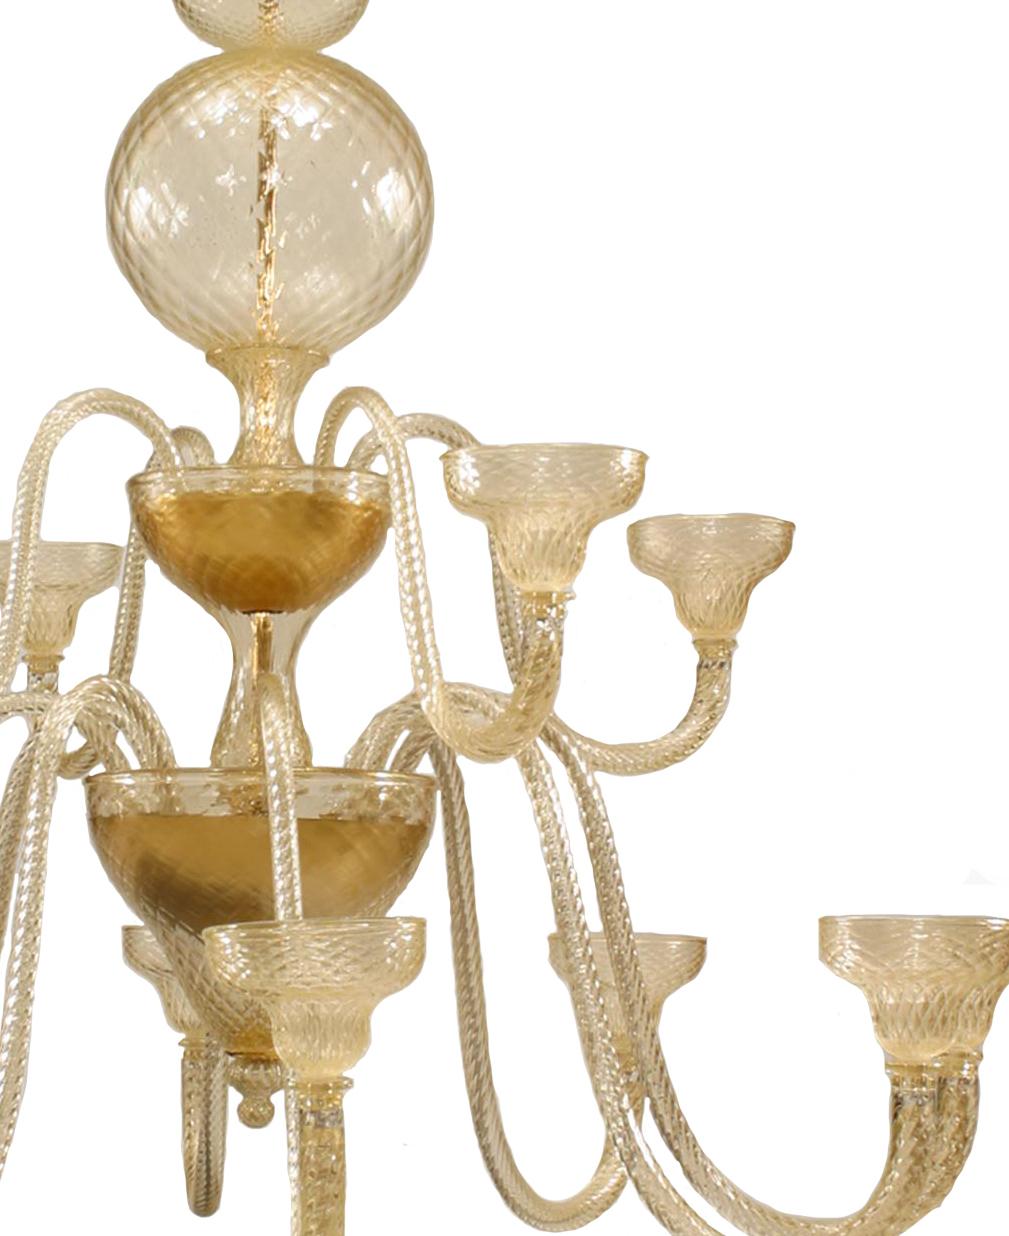 Murano Gold Dusted Glass Ballotton Chandelier In Excellent Condition For Sale In New York, NY